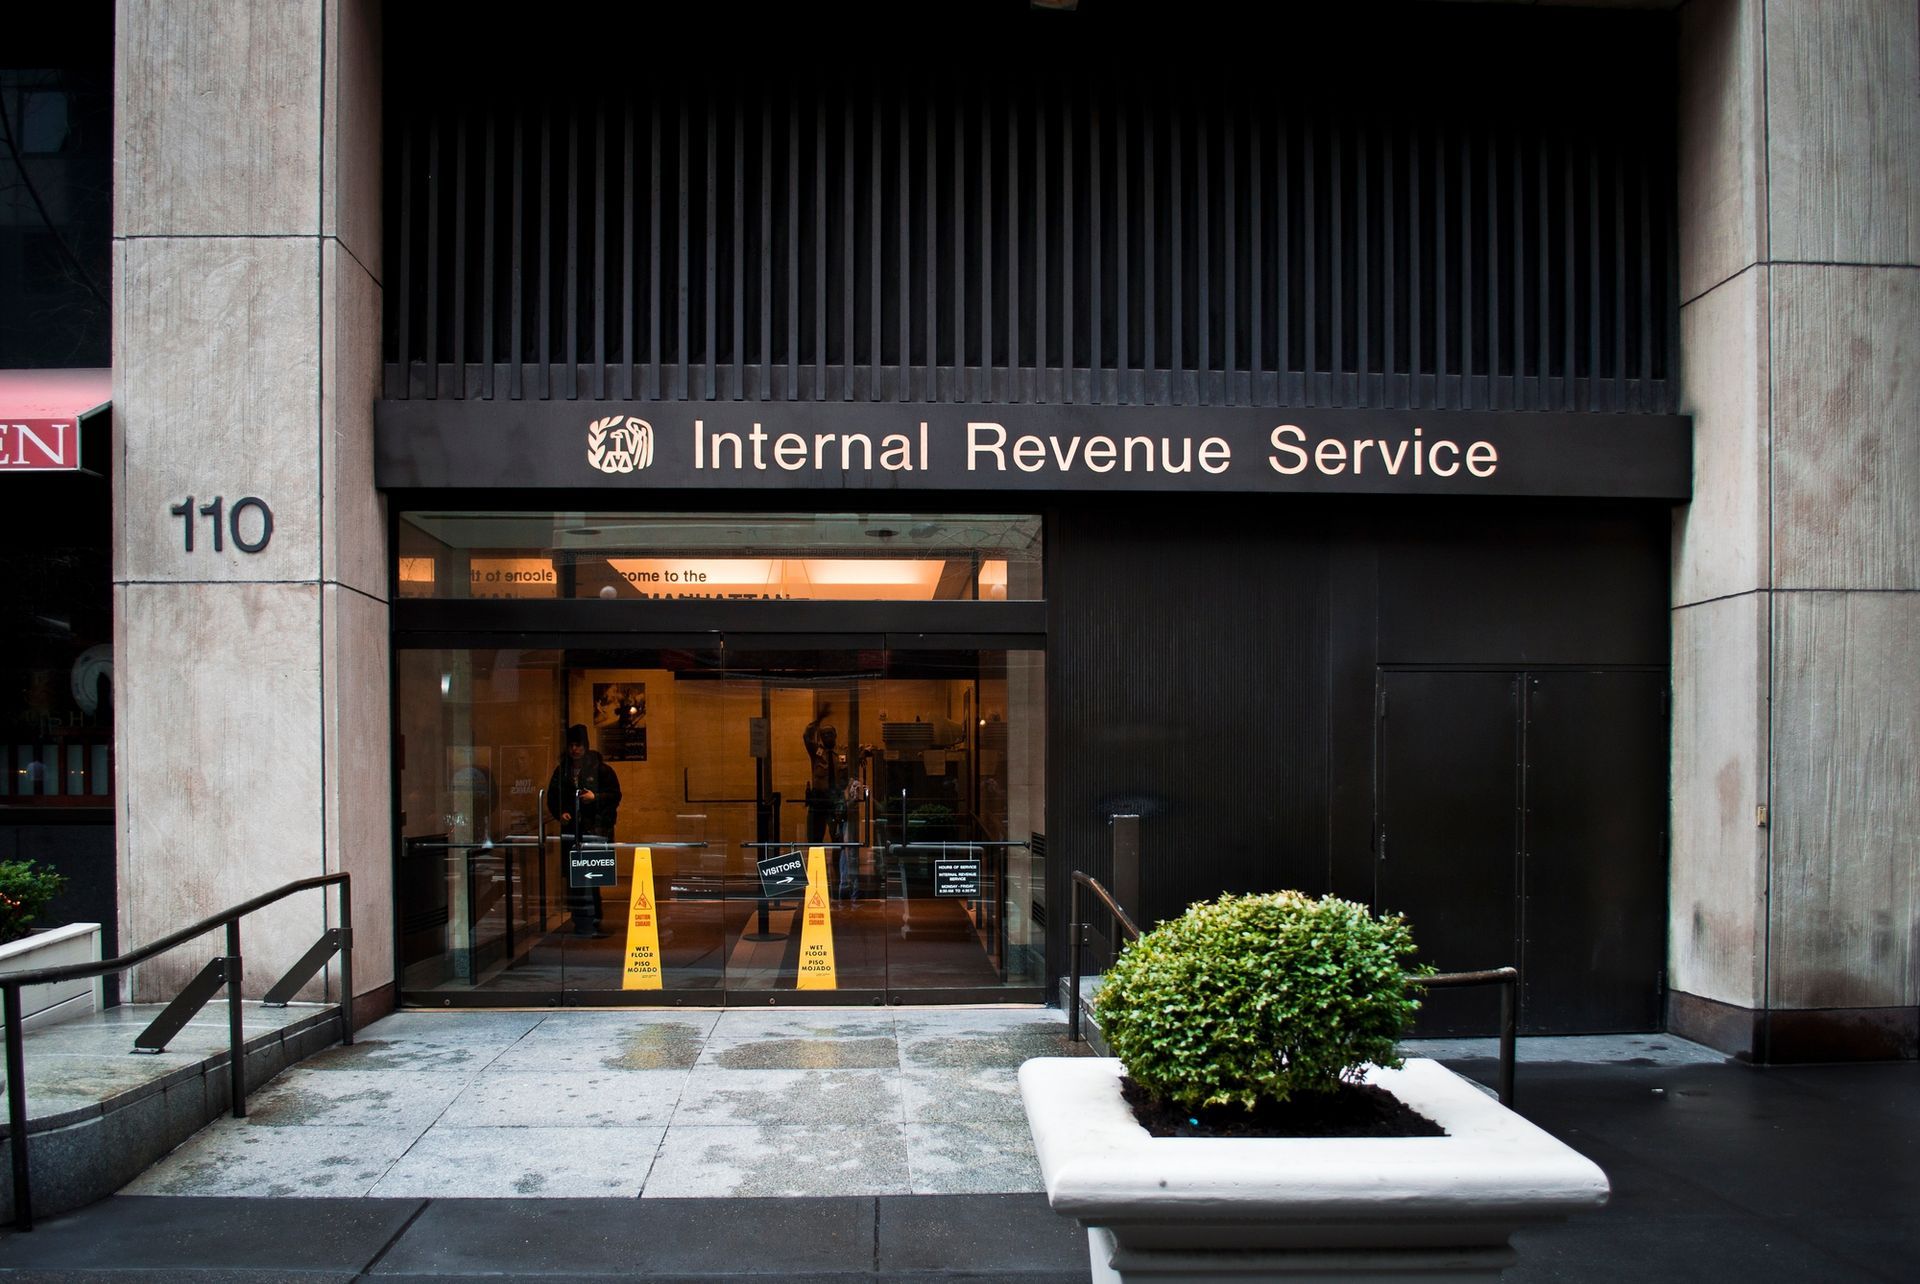 Entrance to IRS building